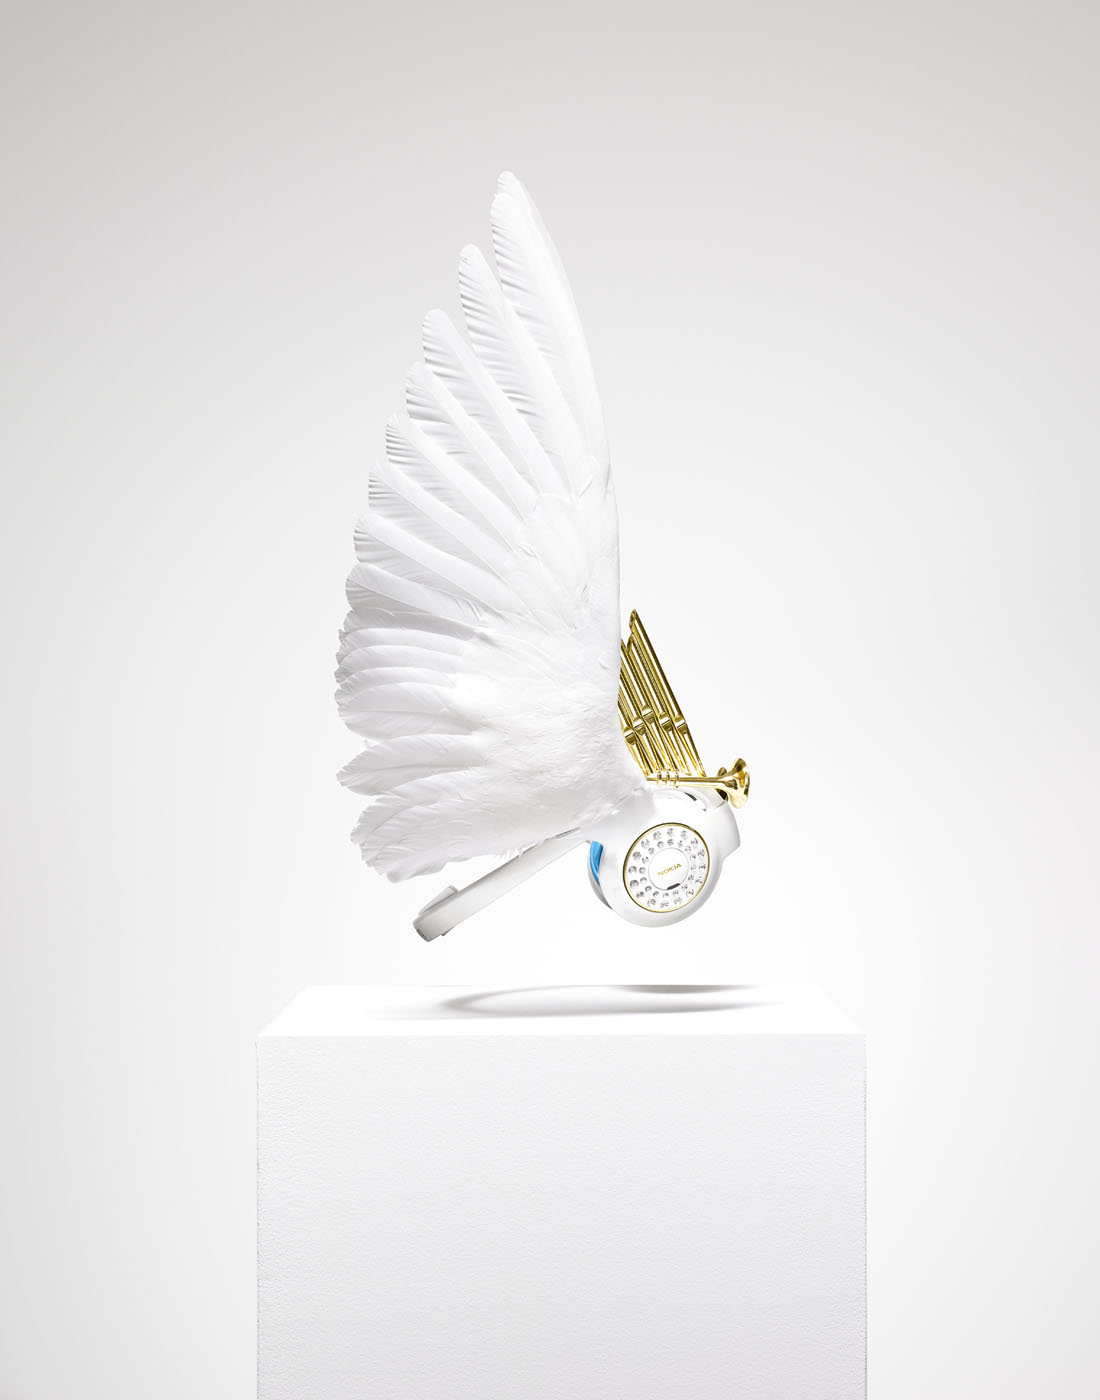 Luxury headphones with feathers by Alexander Kent London based still life and product photographer.